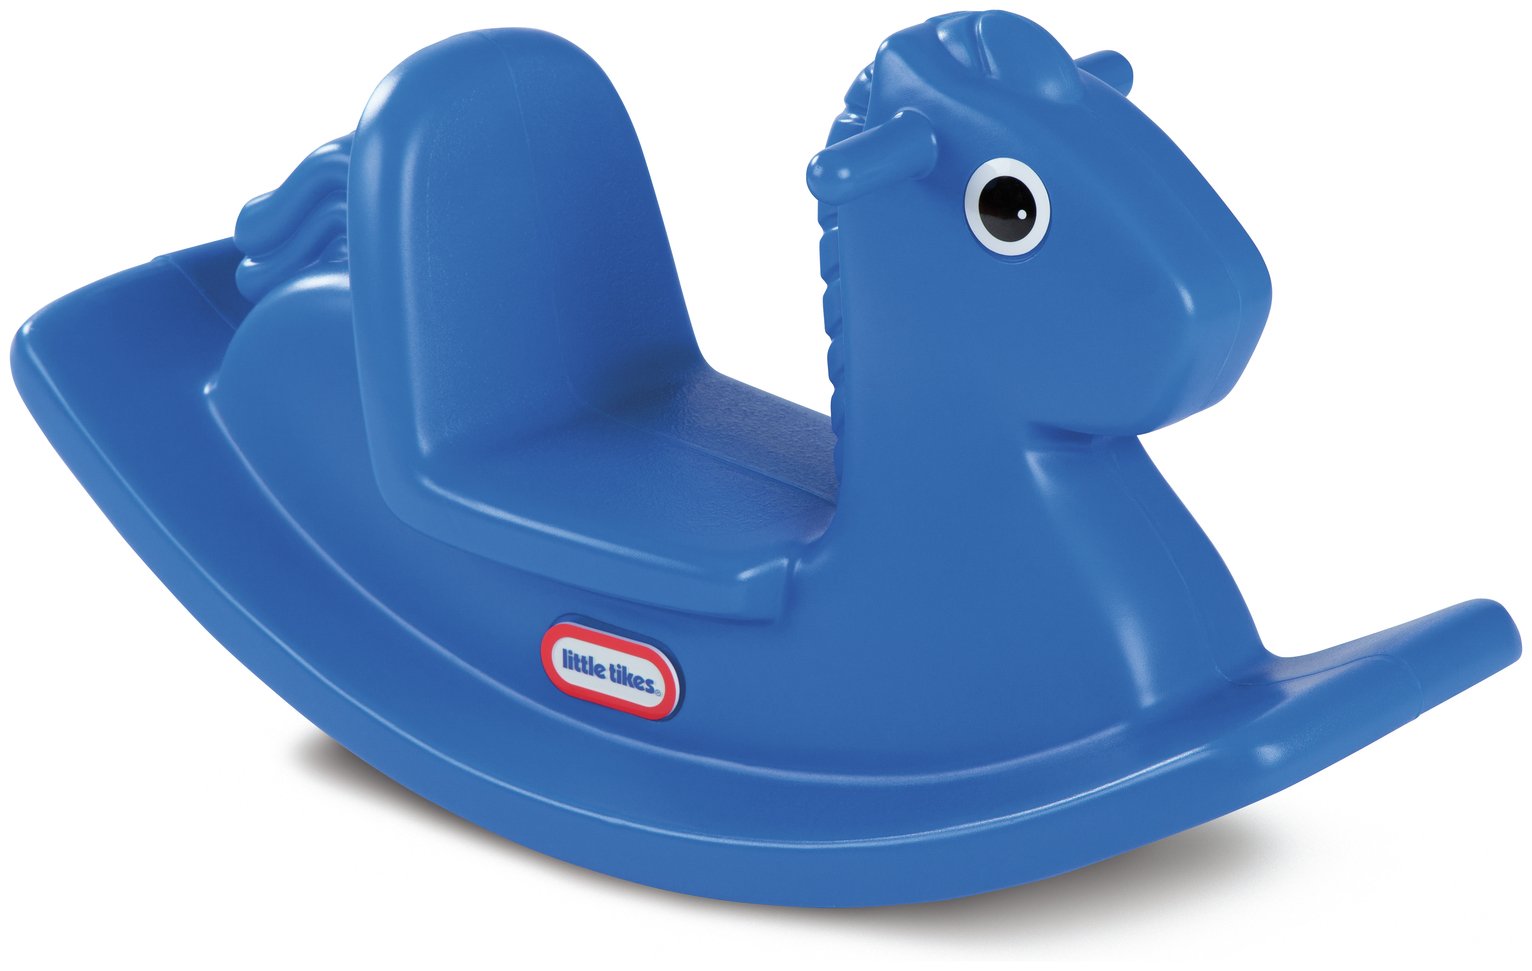 Little Tikes Blue Rocking Horse review